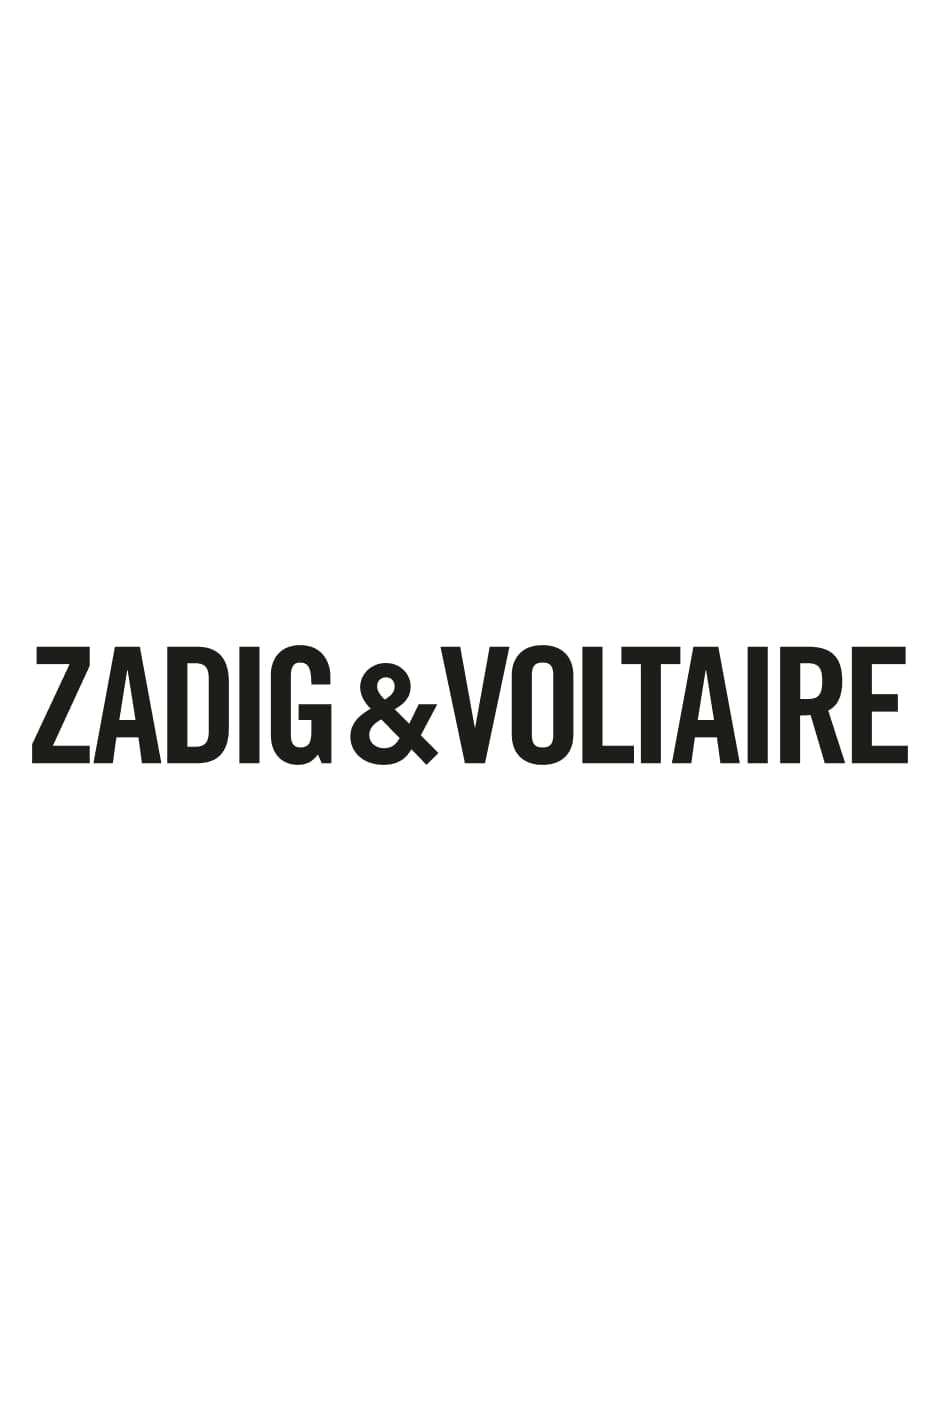 Sac Portefeuille ZV Initiale Le Long Unchained Portefeuille sur chaine en cuir Noir ZV initiale Femme